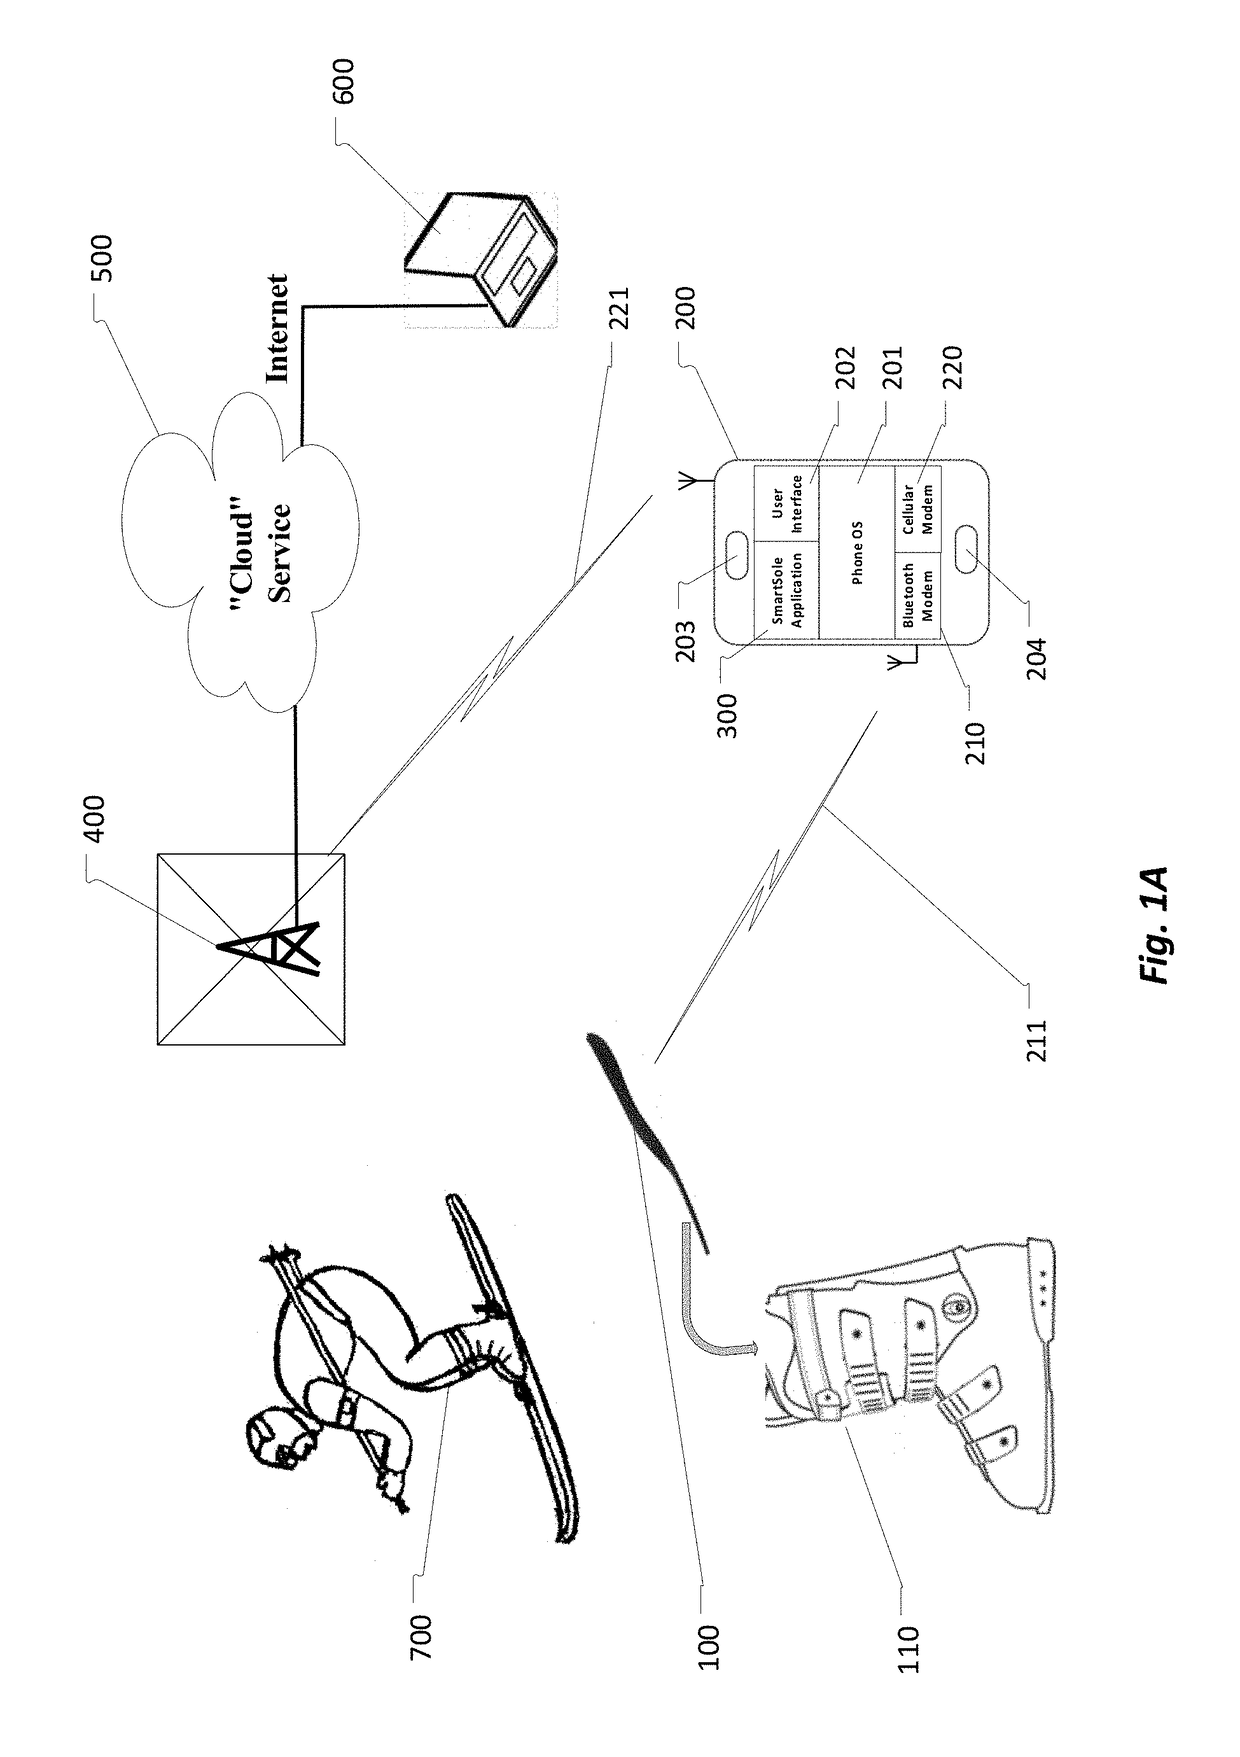 Method and Apparatus for Analysis of Gait and to Provide Haptic and Visual Corrective Feedback